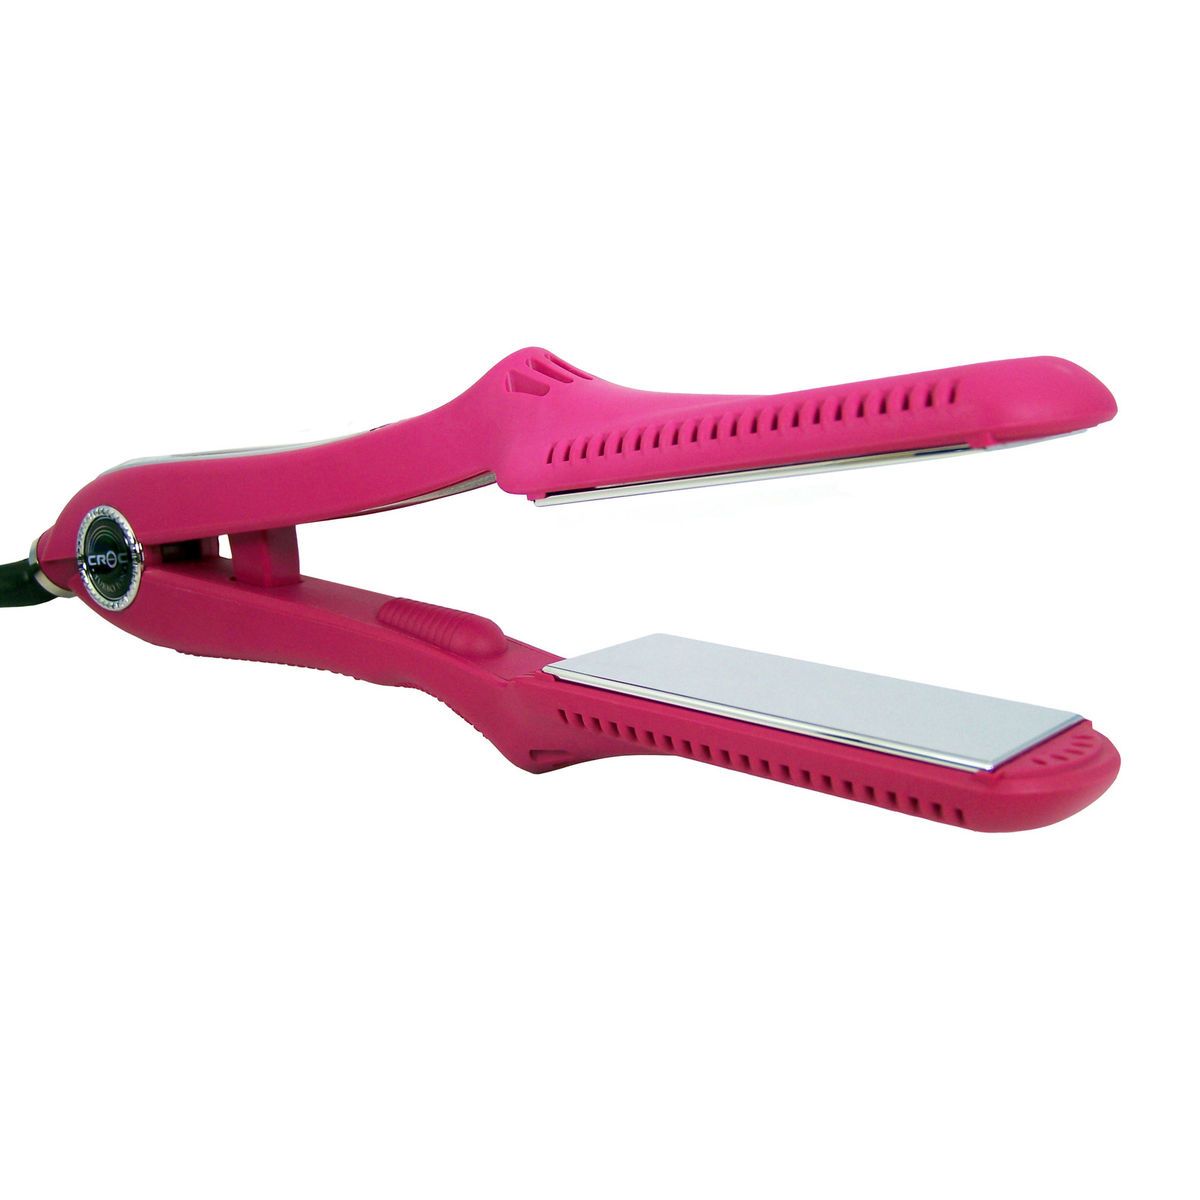 TurboIon Croc Wet to Dry Pink N   Croc Flat Iron Titanium Wet to Dry